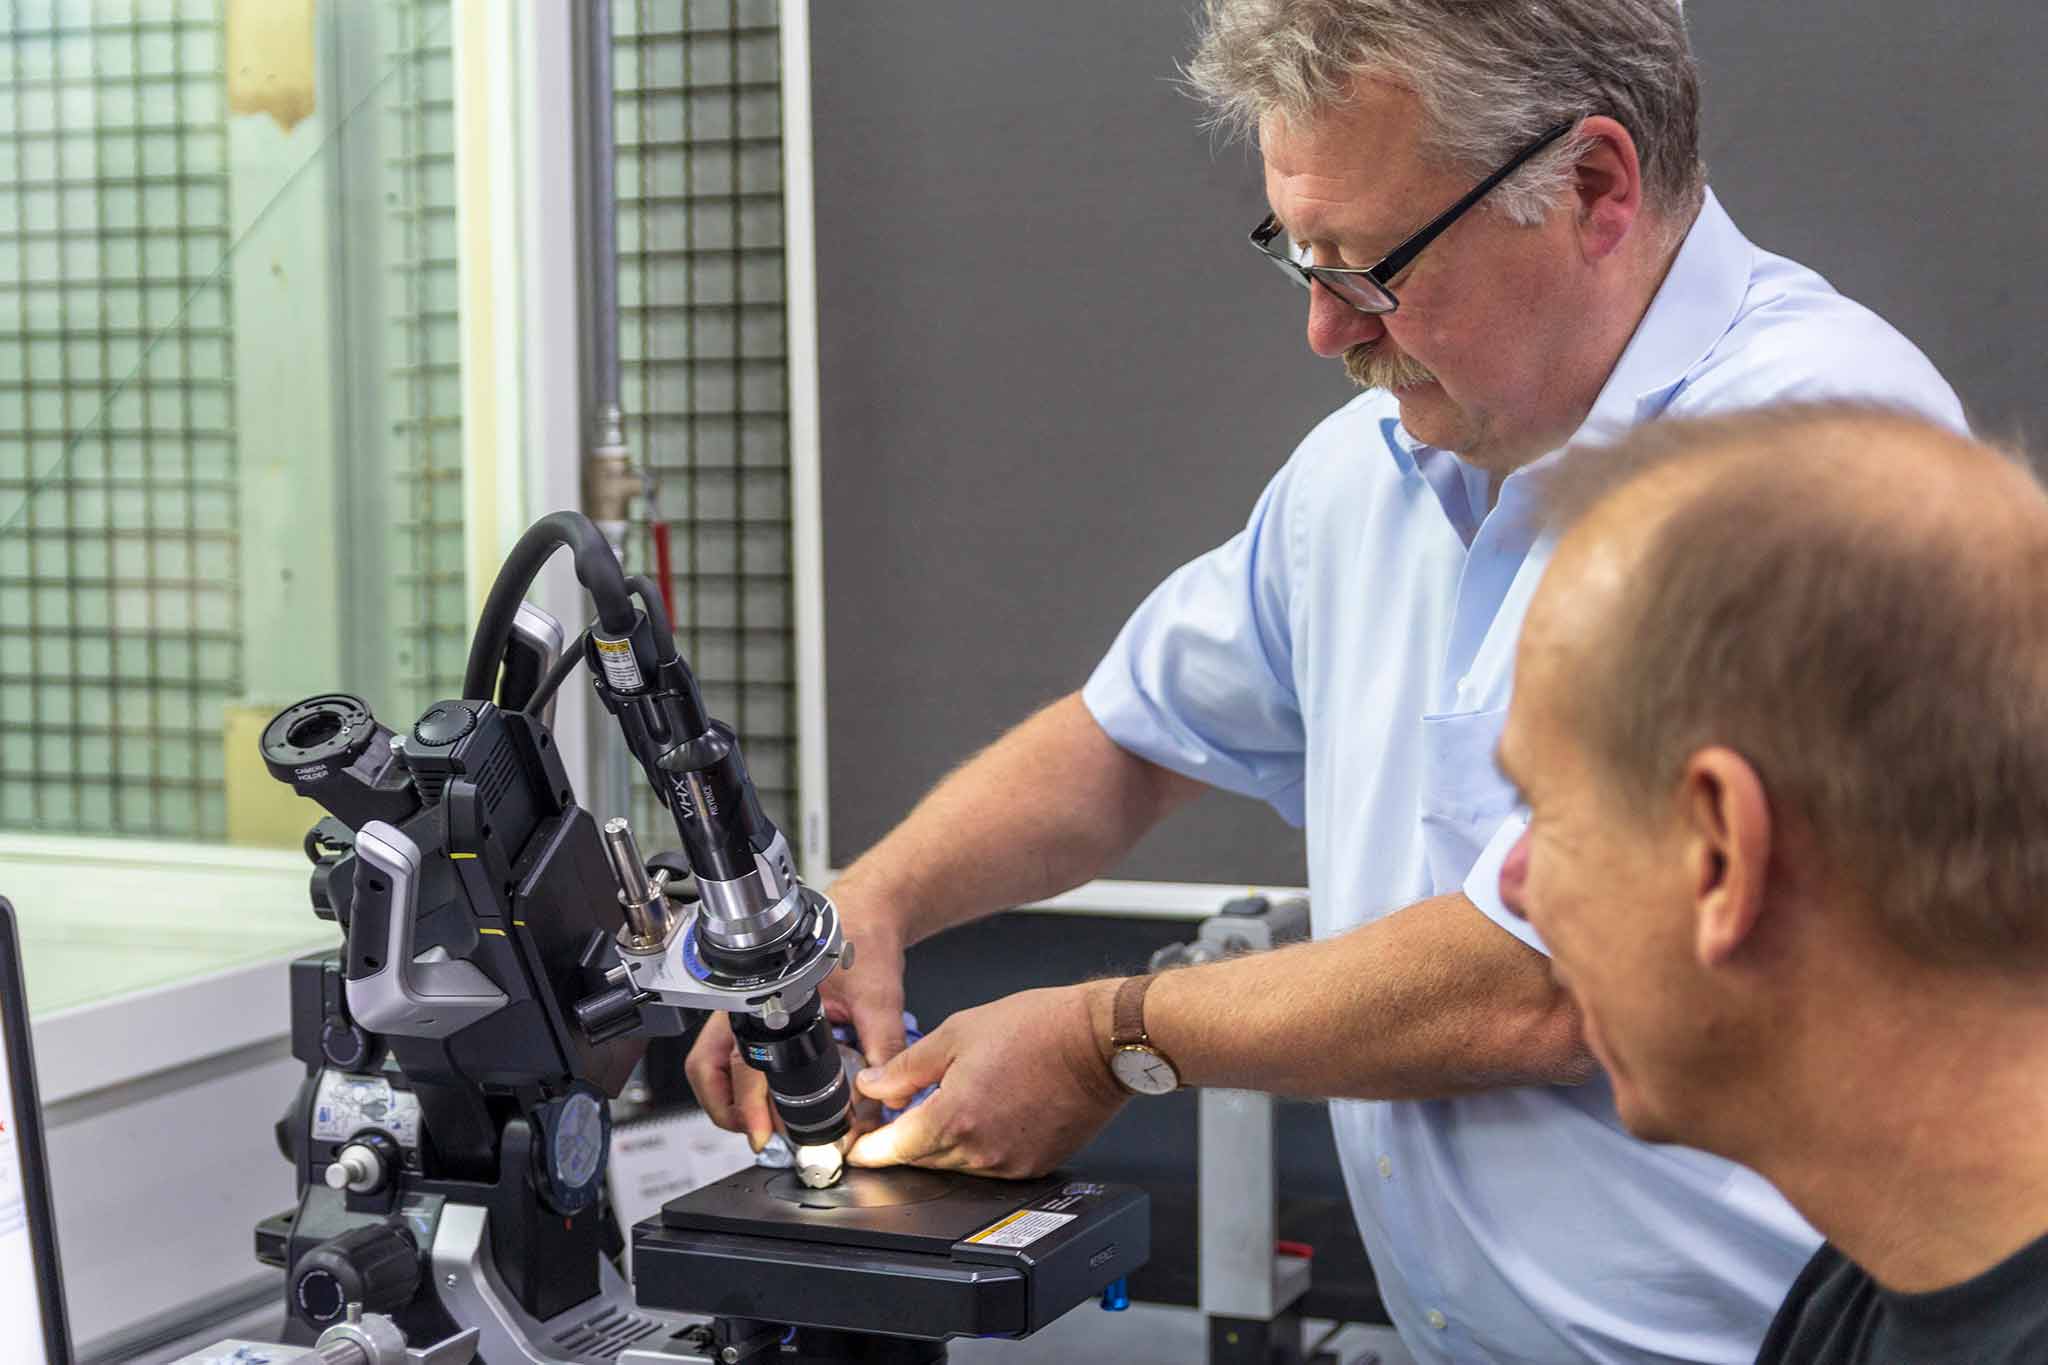 Klaus Schwamborn and Armin Joussen in the Neapco tool-setting area. There they check the wear and tear of a tool.